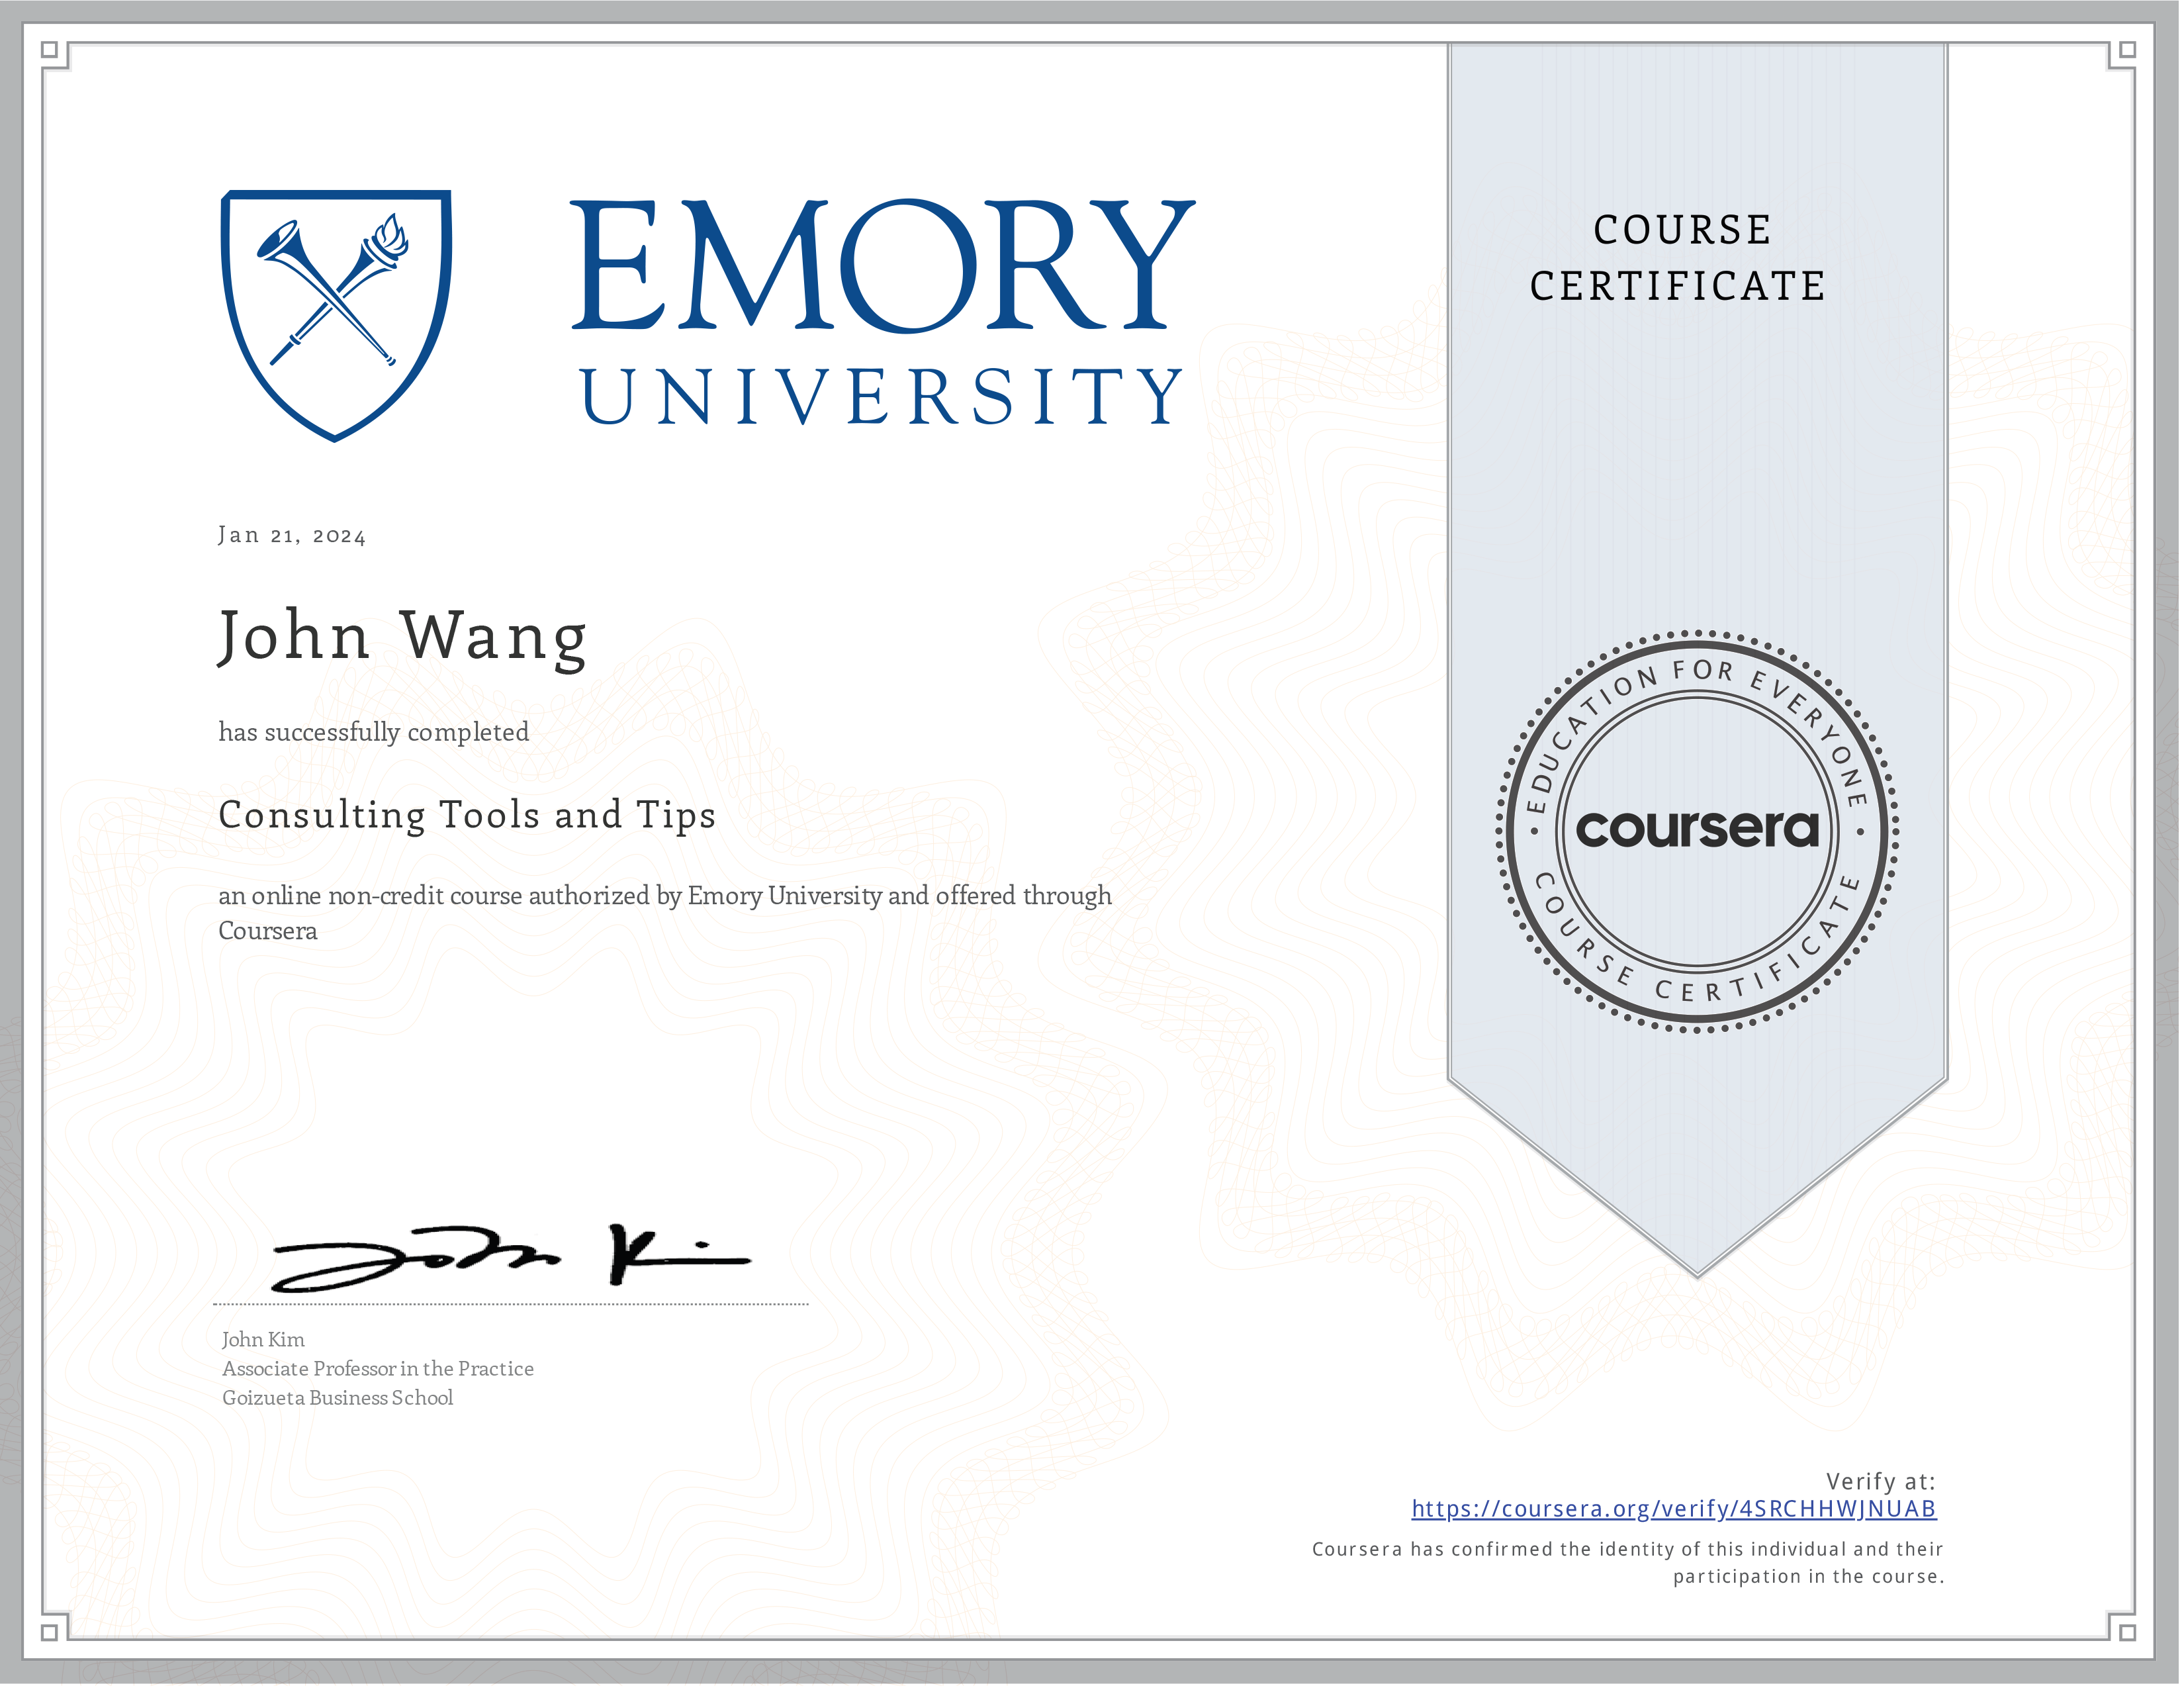 John's Consulting Tools and Tips from Emory University by John Kim